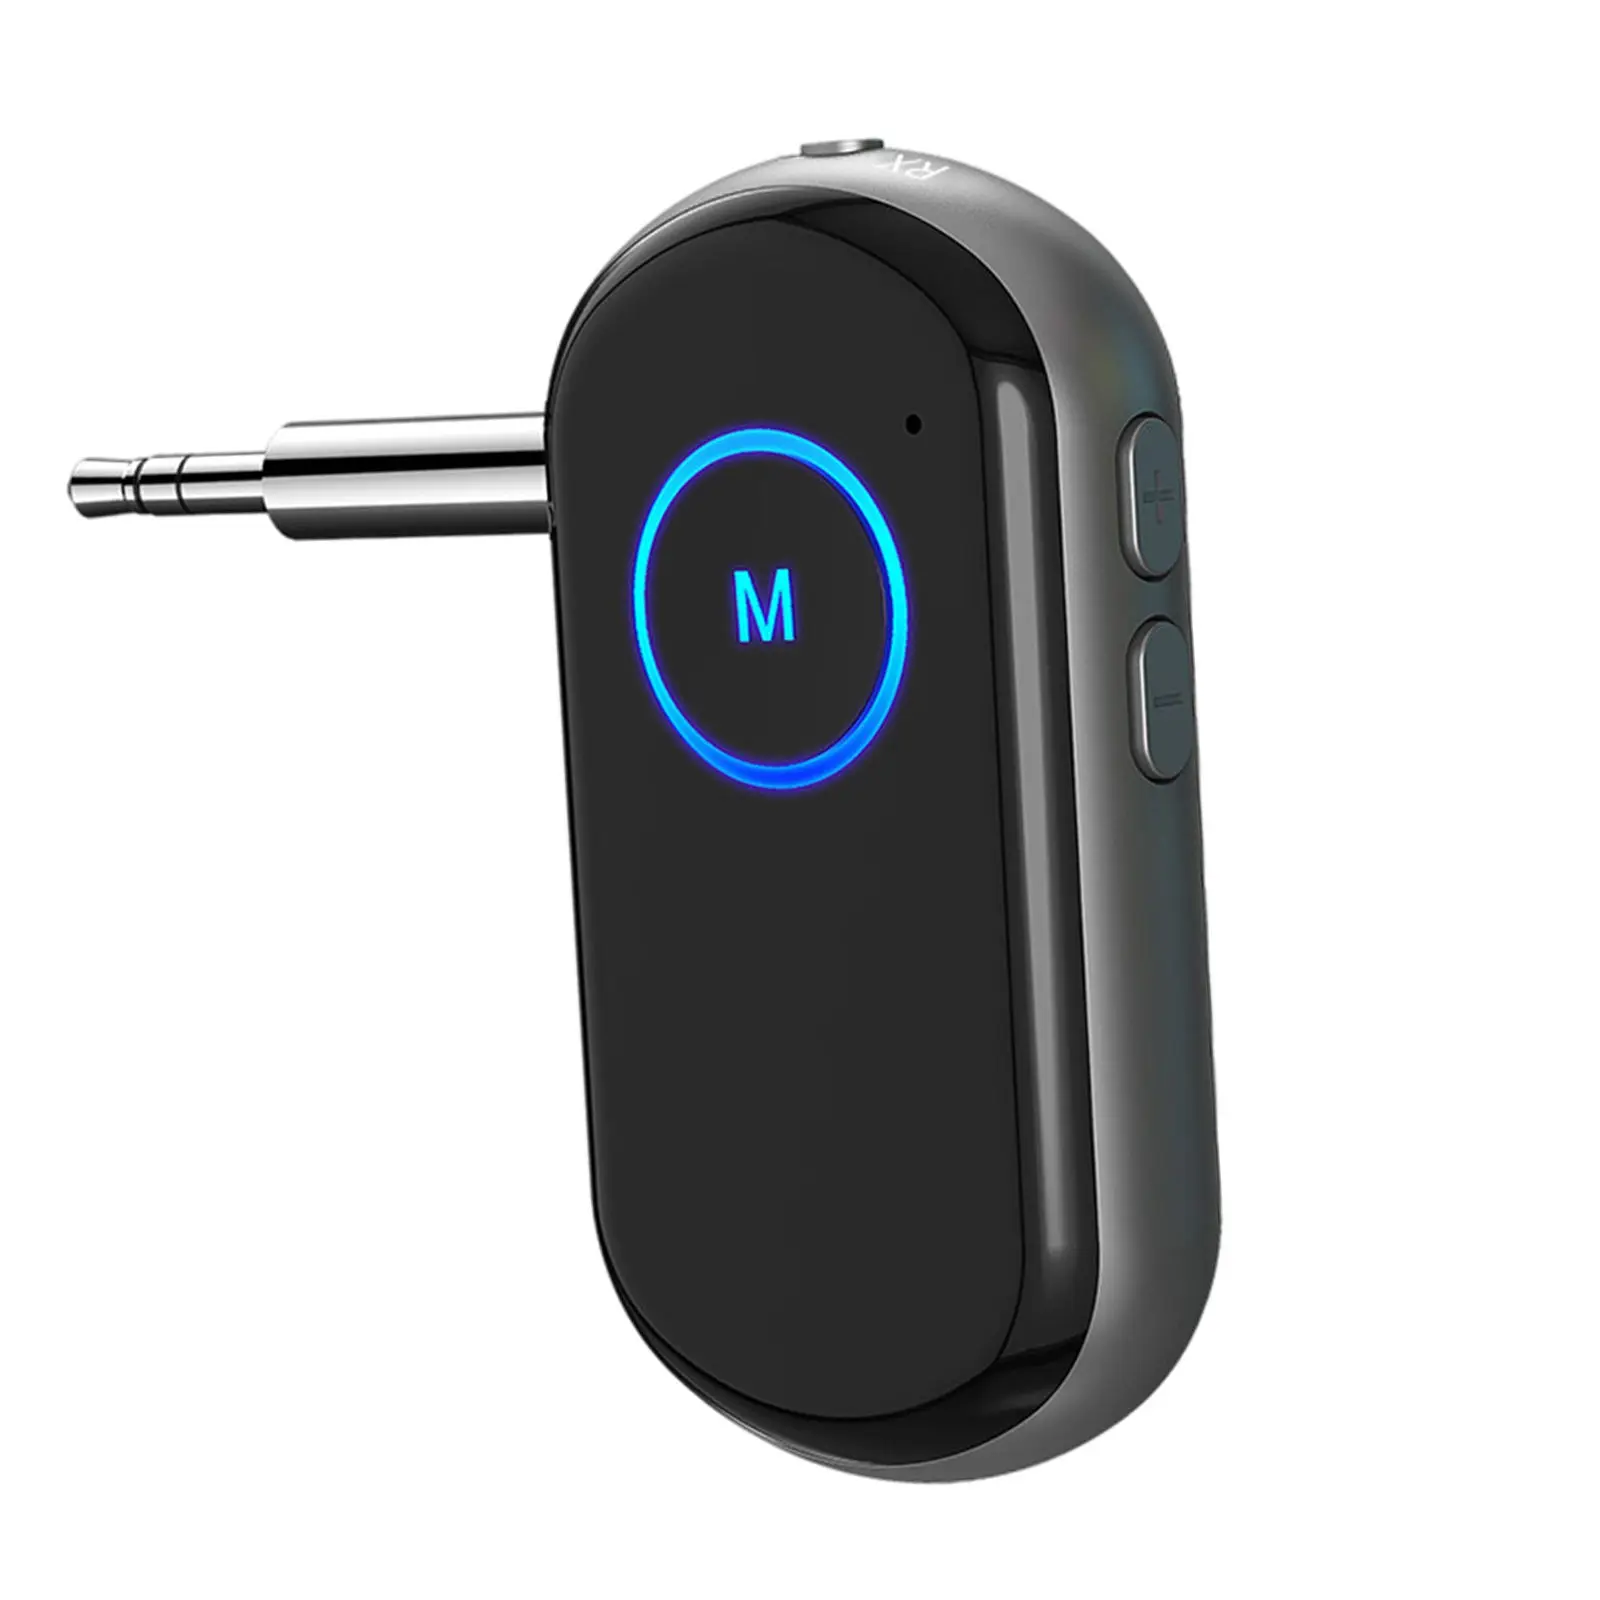 Bluetooth Adapter Signal Stability Navigation 3.5mm Plug in Play Transmitter for Home